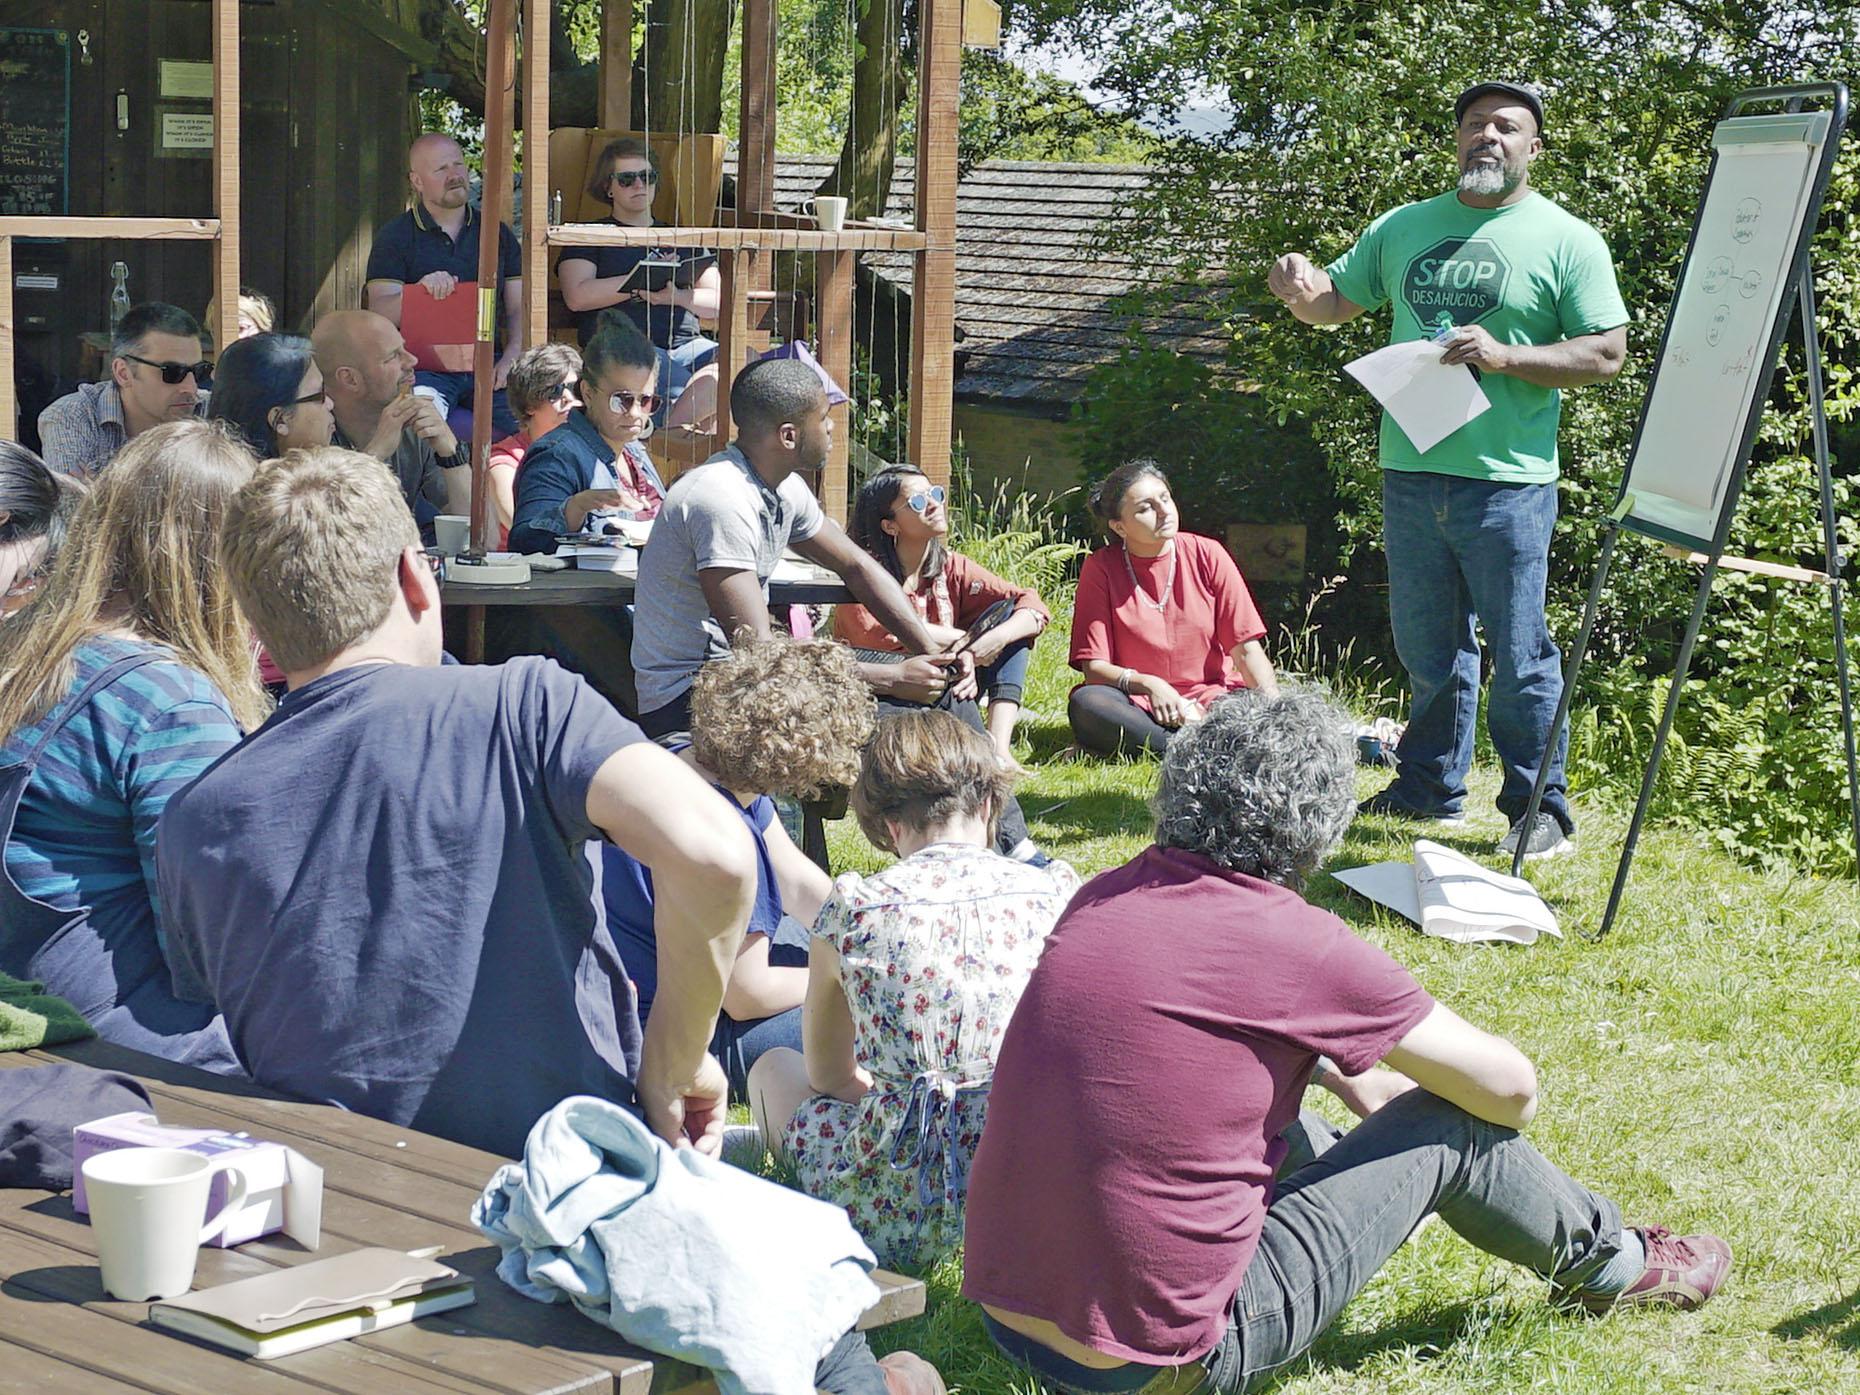 Akuno leads a residential in Dorset for people to learn how to replicate the work of Cooperation Jackson in the UK